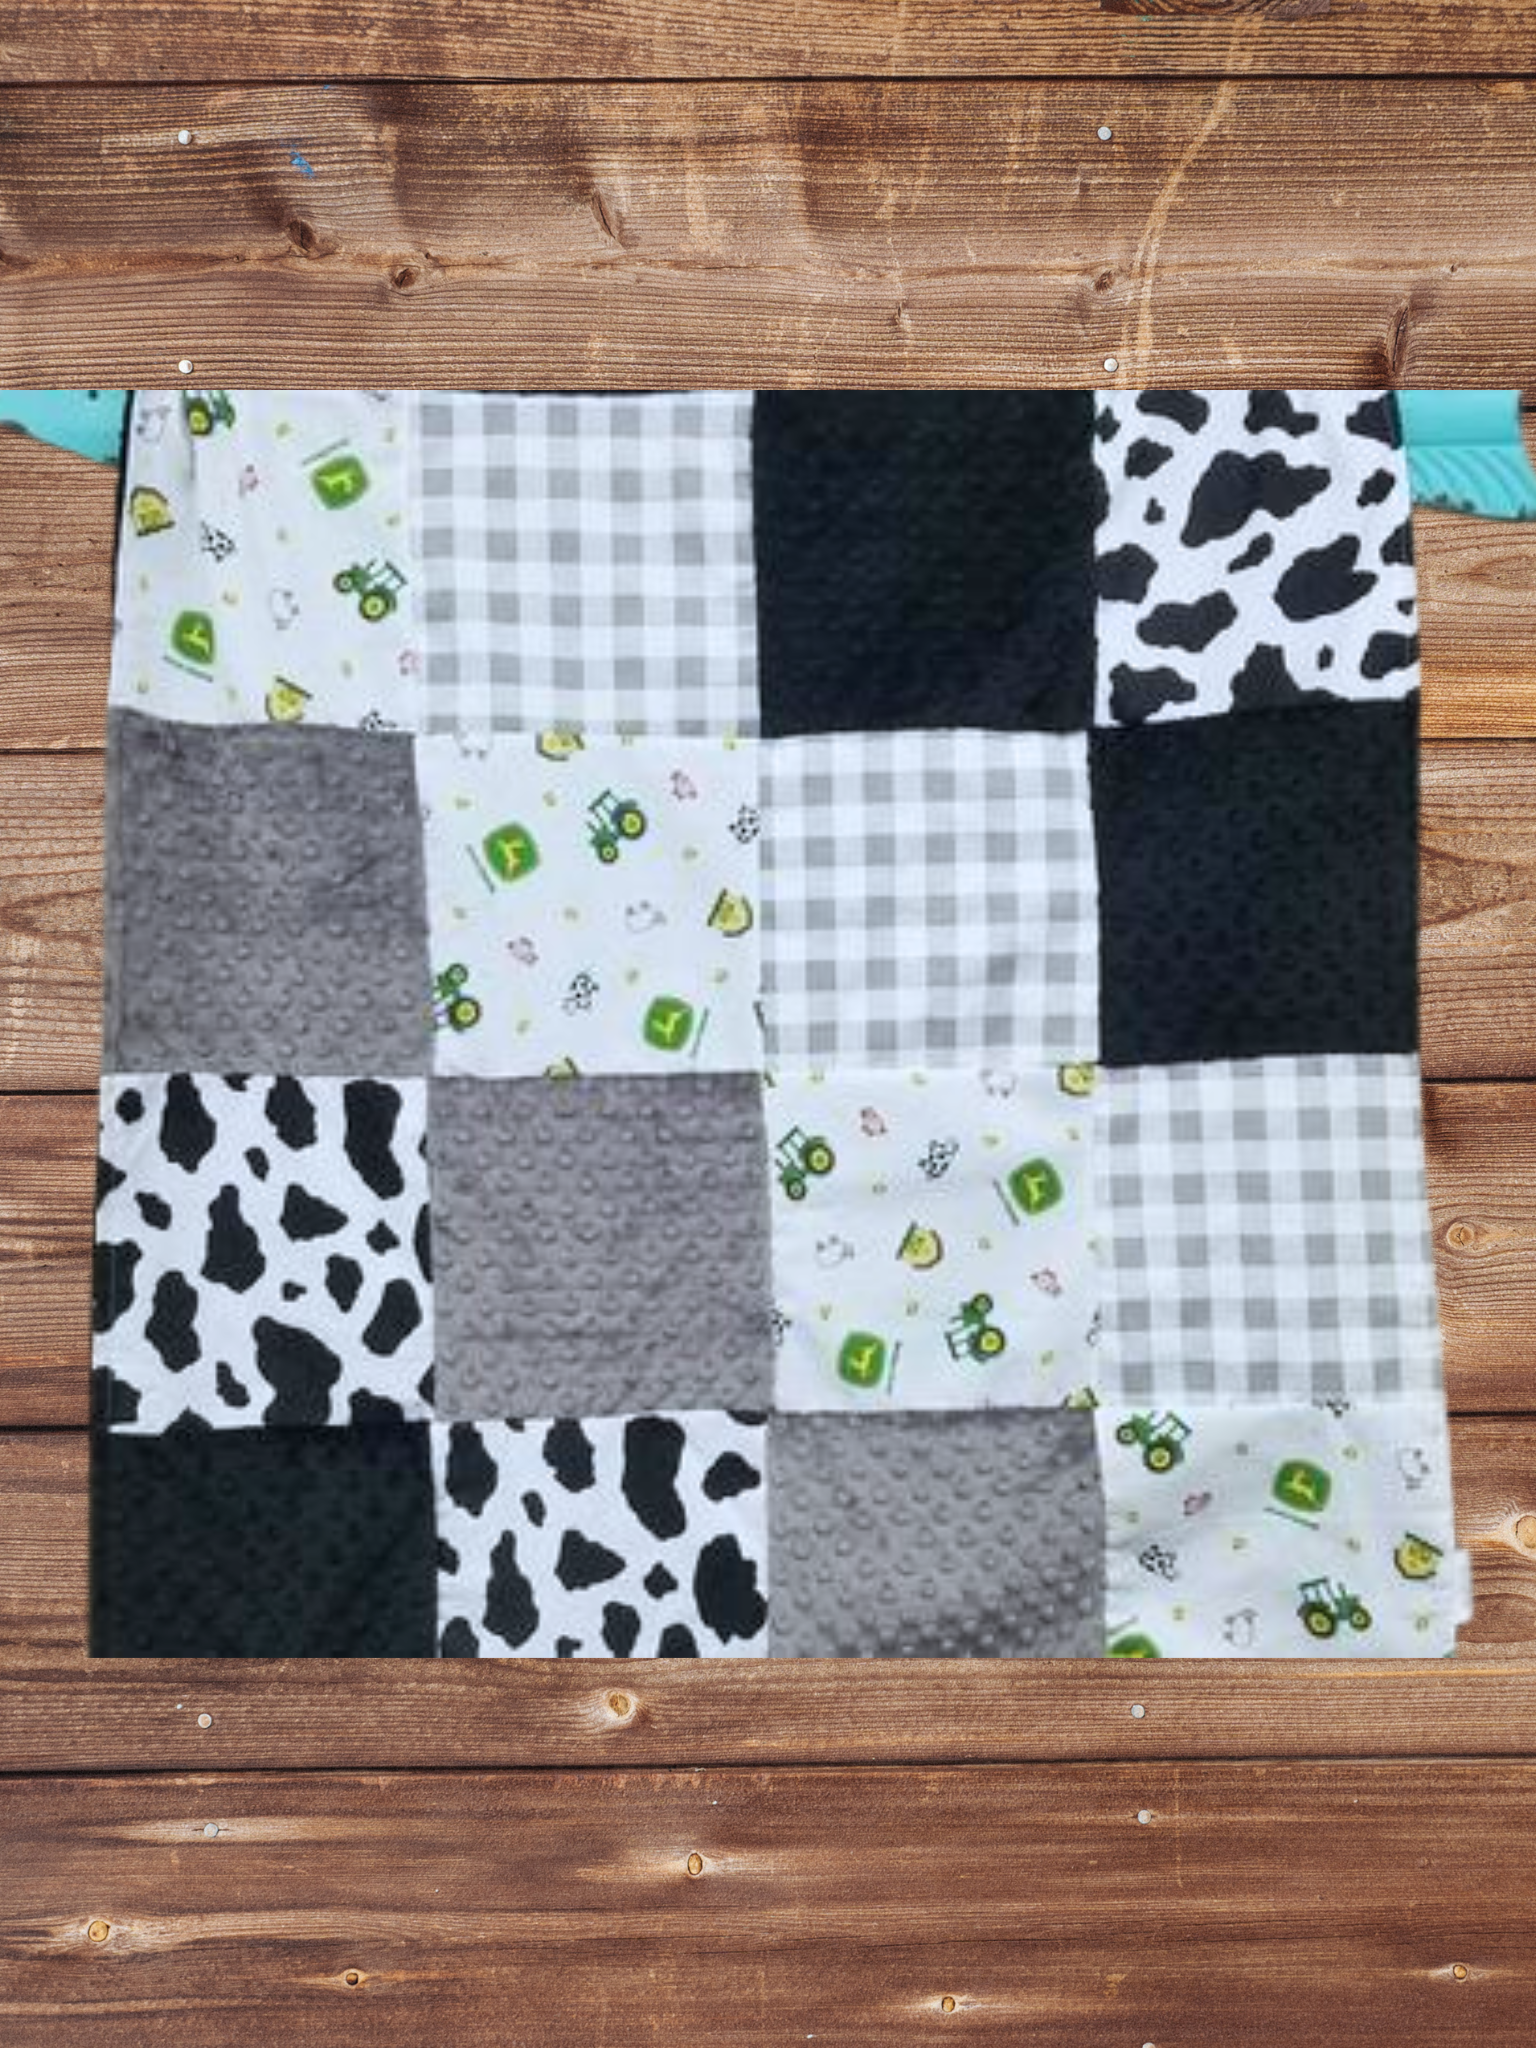 Patchwork Blanket - Tractors and Black White Cow Print Farm Blanket - DBC Baby Bedding Co 